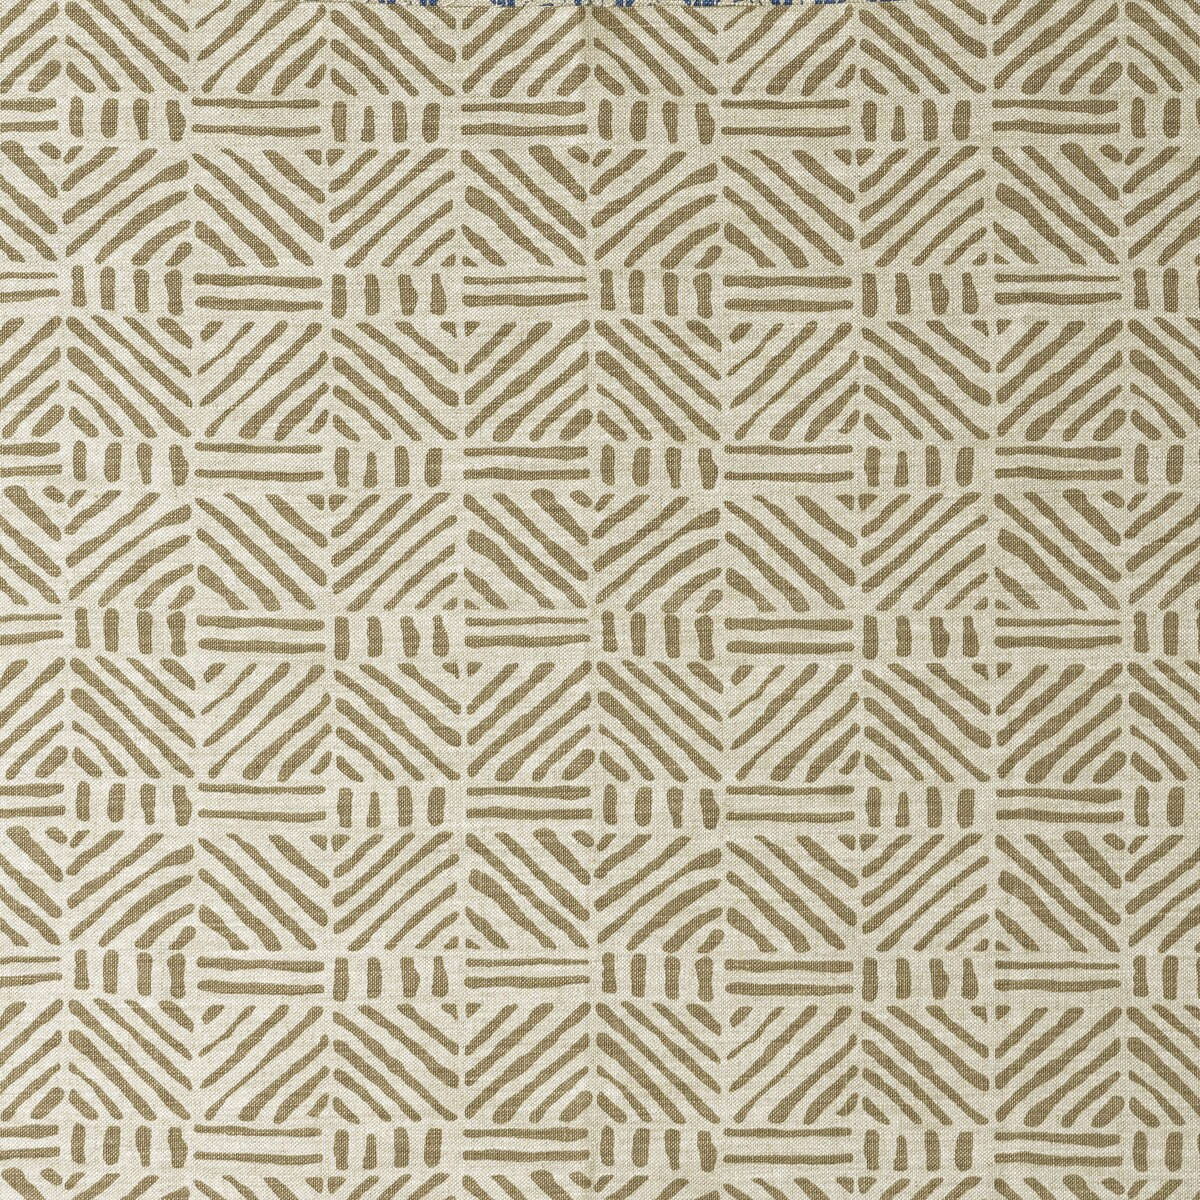 Linwood fabric in stone color - pattern BFC-3681.106.0 - by Lee Jofa in the Blithfield collection